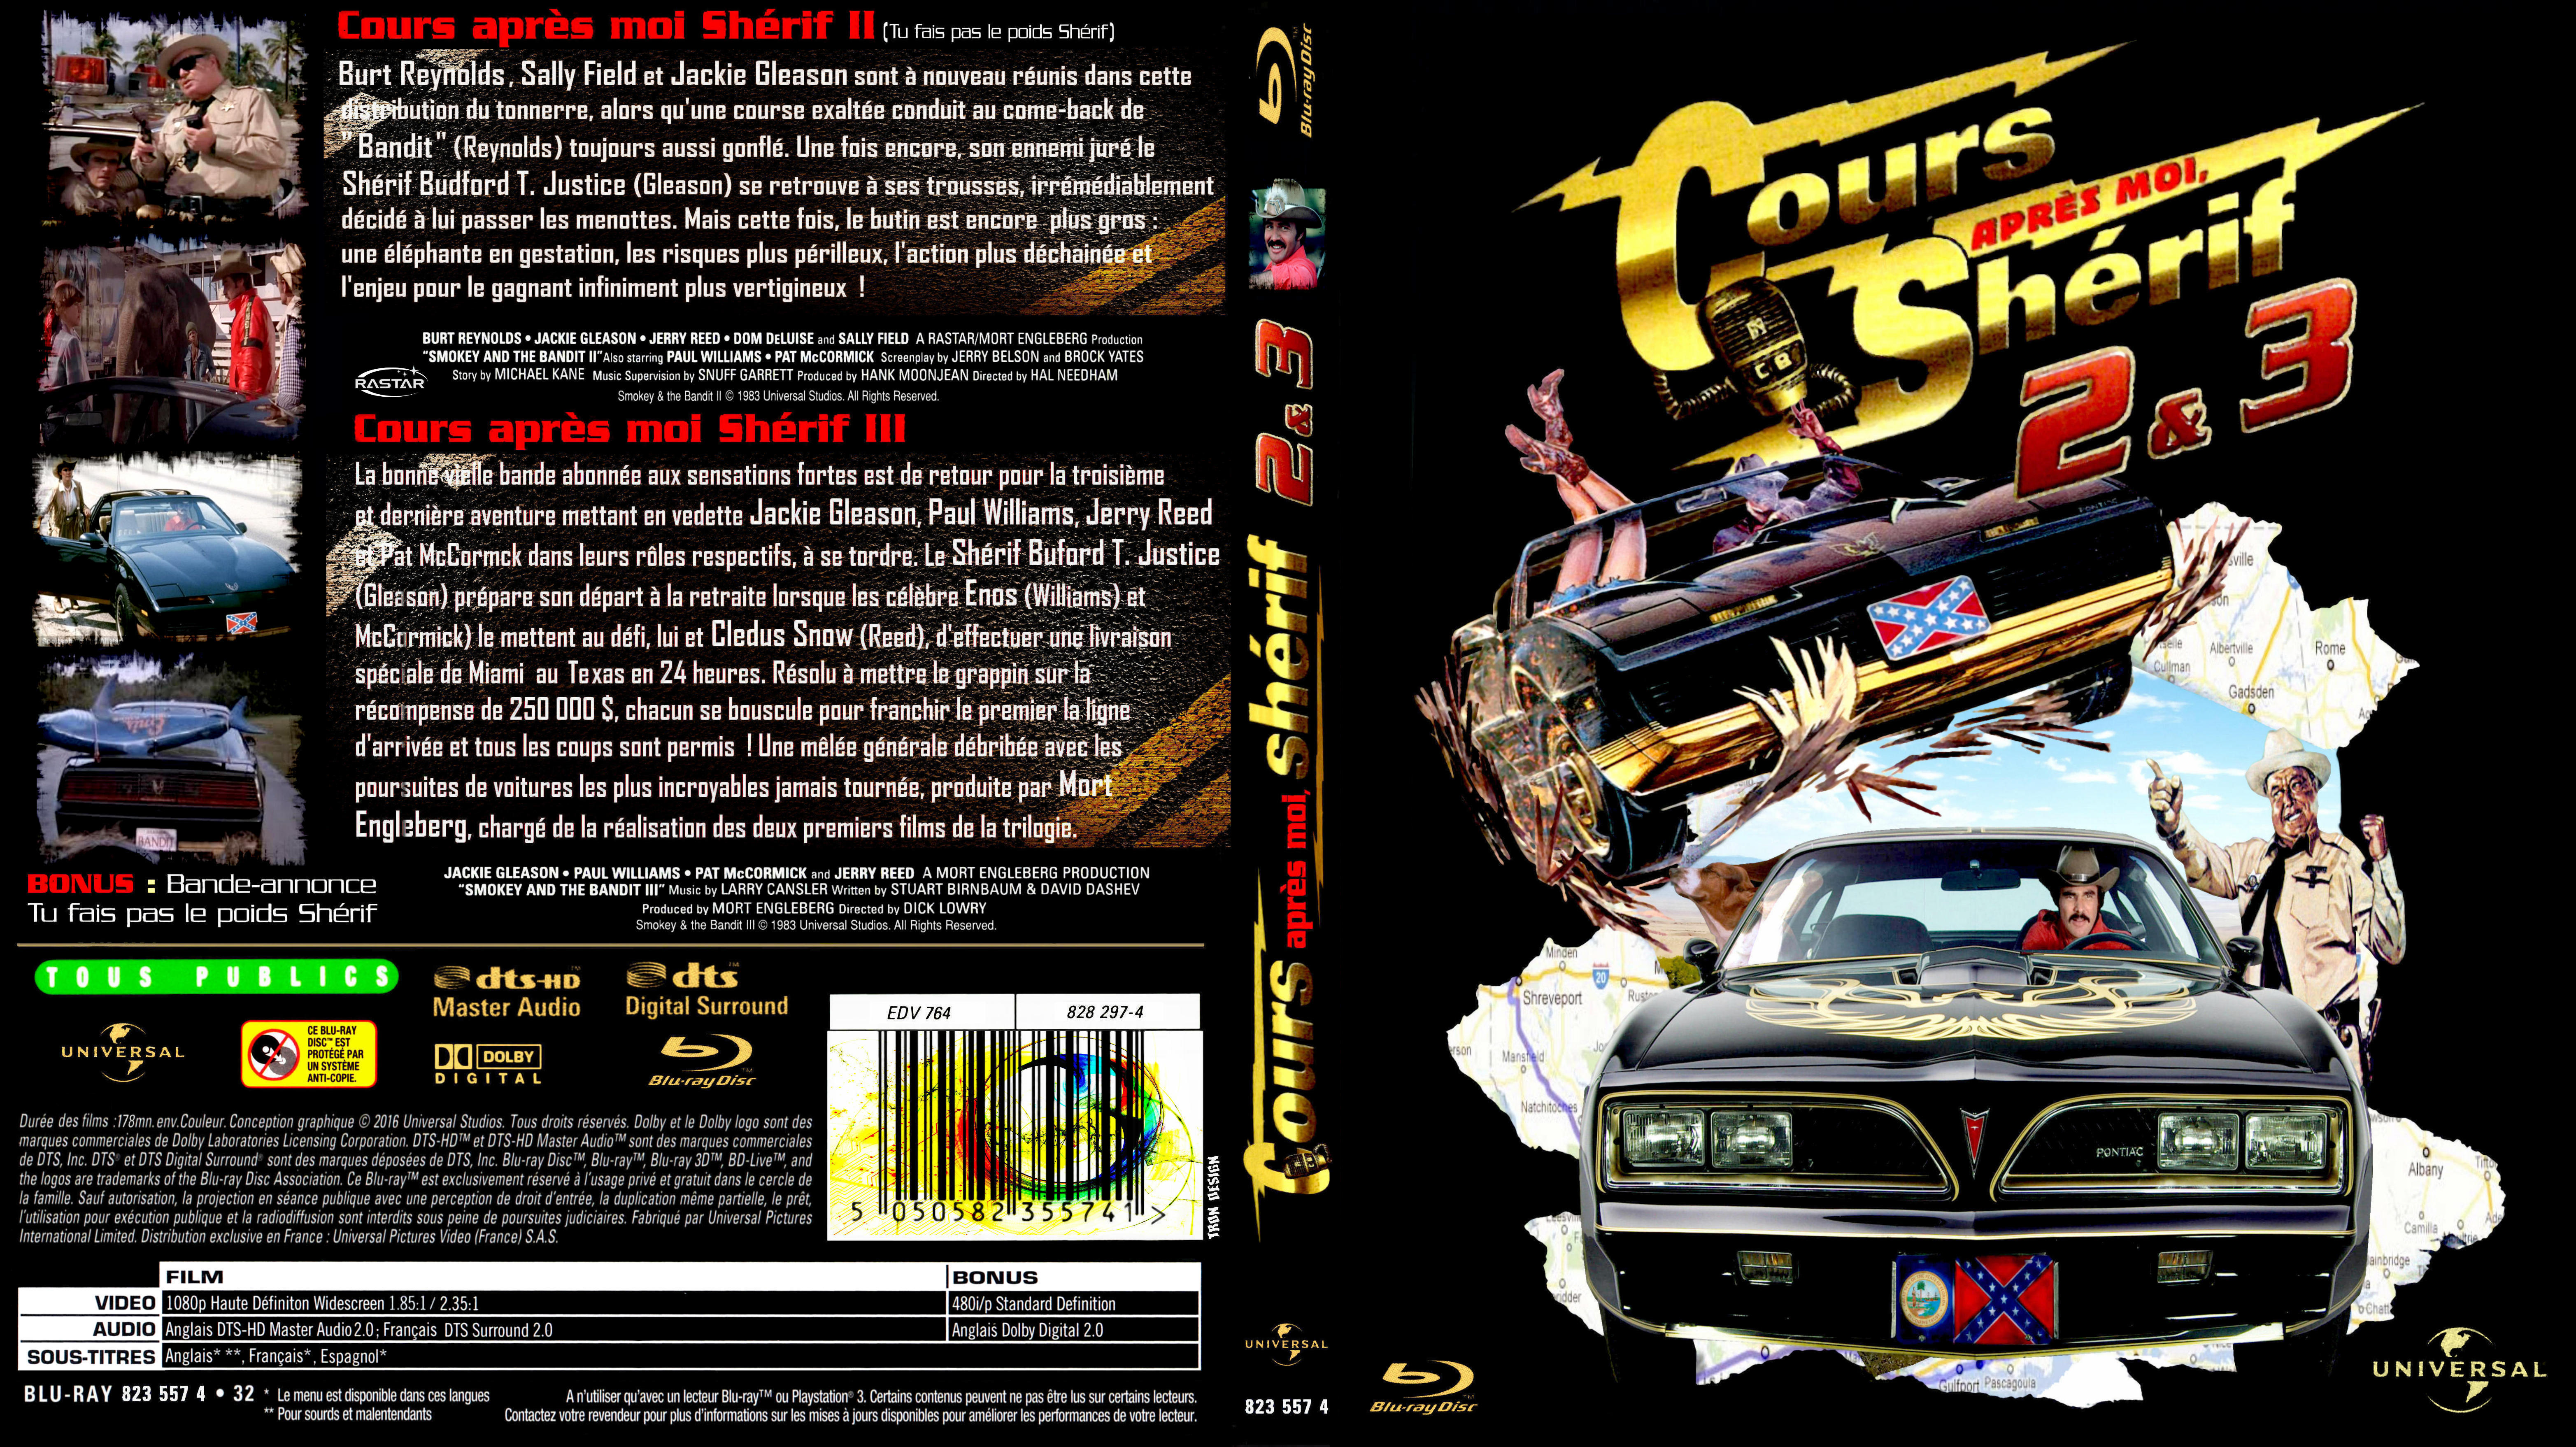 Jaquette DVD Cours aprs moi shrif (part 2 & 3) custom (BLU-RAY)